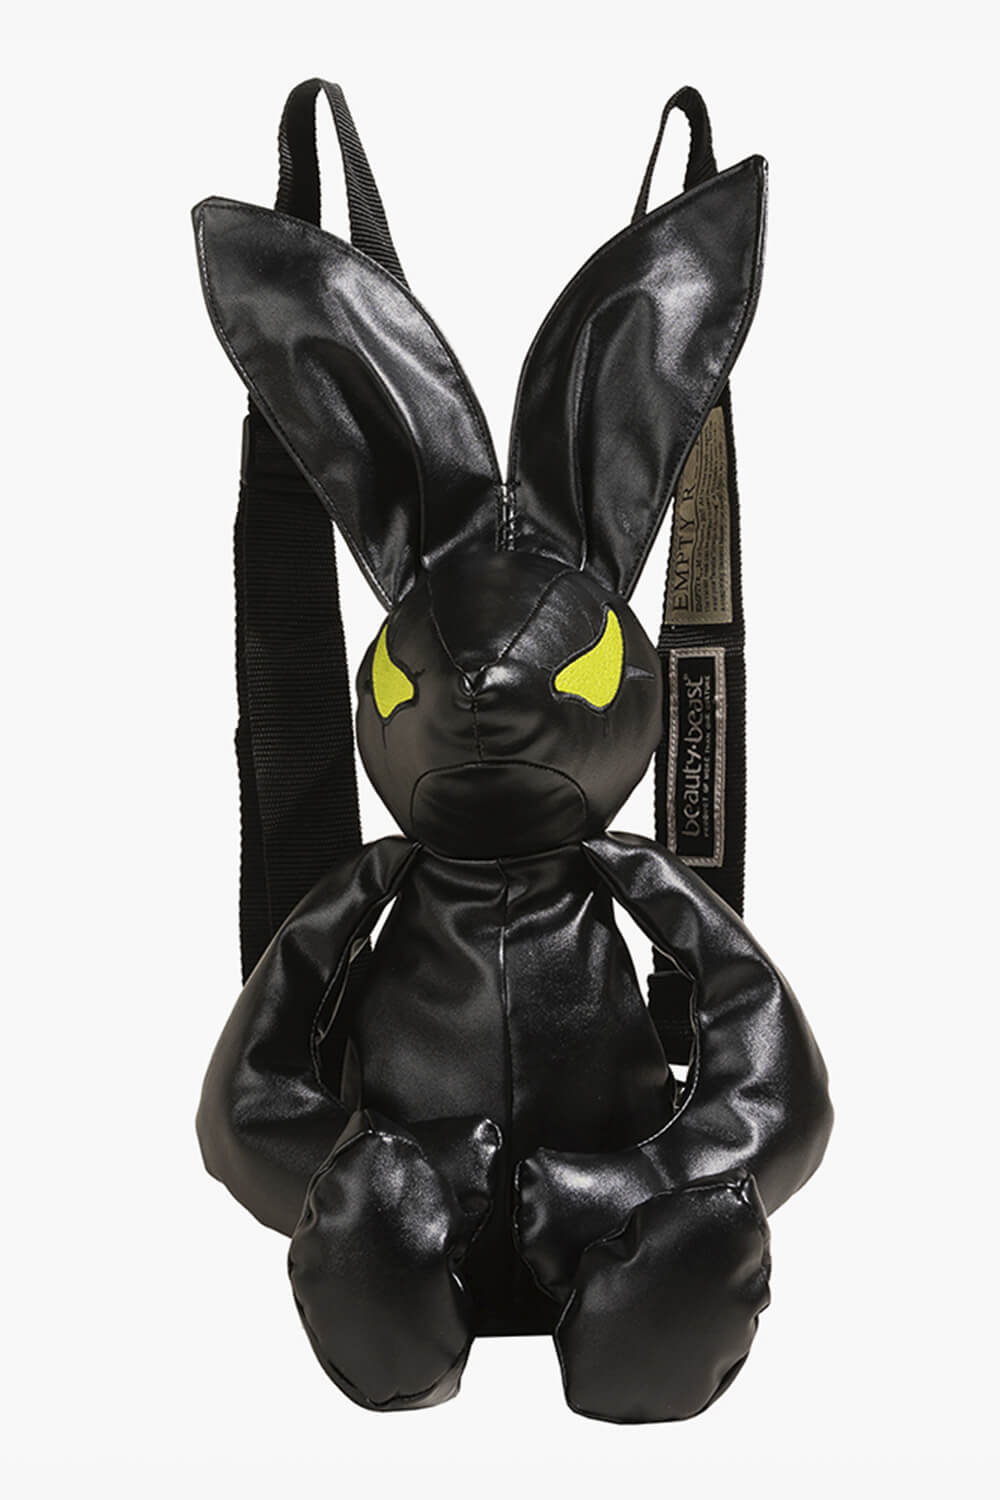 Second Life Marketplace - Black Bunny Backpack